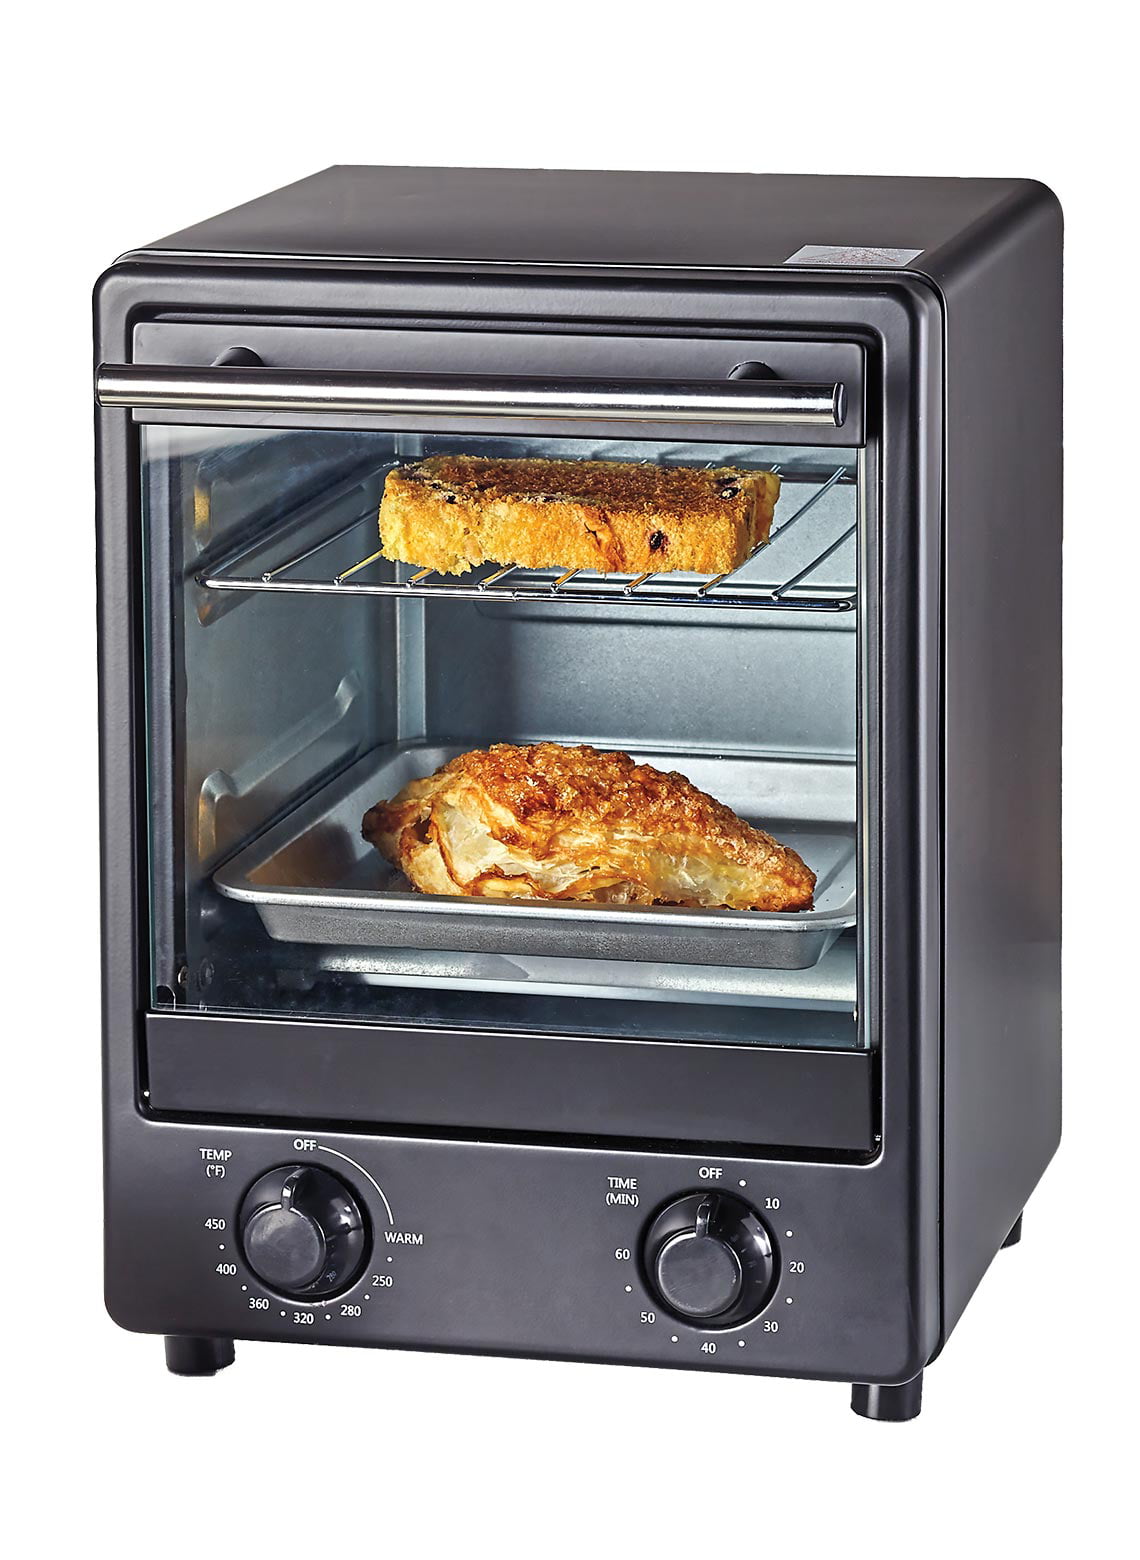 Convection oven Indicator light J-Jati Countertop oven Silver and Broil Countertop Toaster Oven Electric 800W Thermostat in celcius SK-12 glass door Toast Bake Non-stick tray